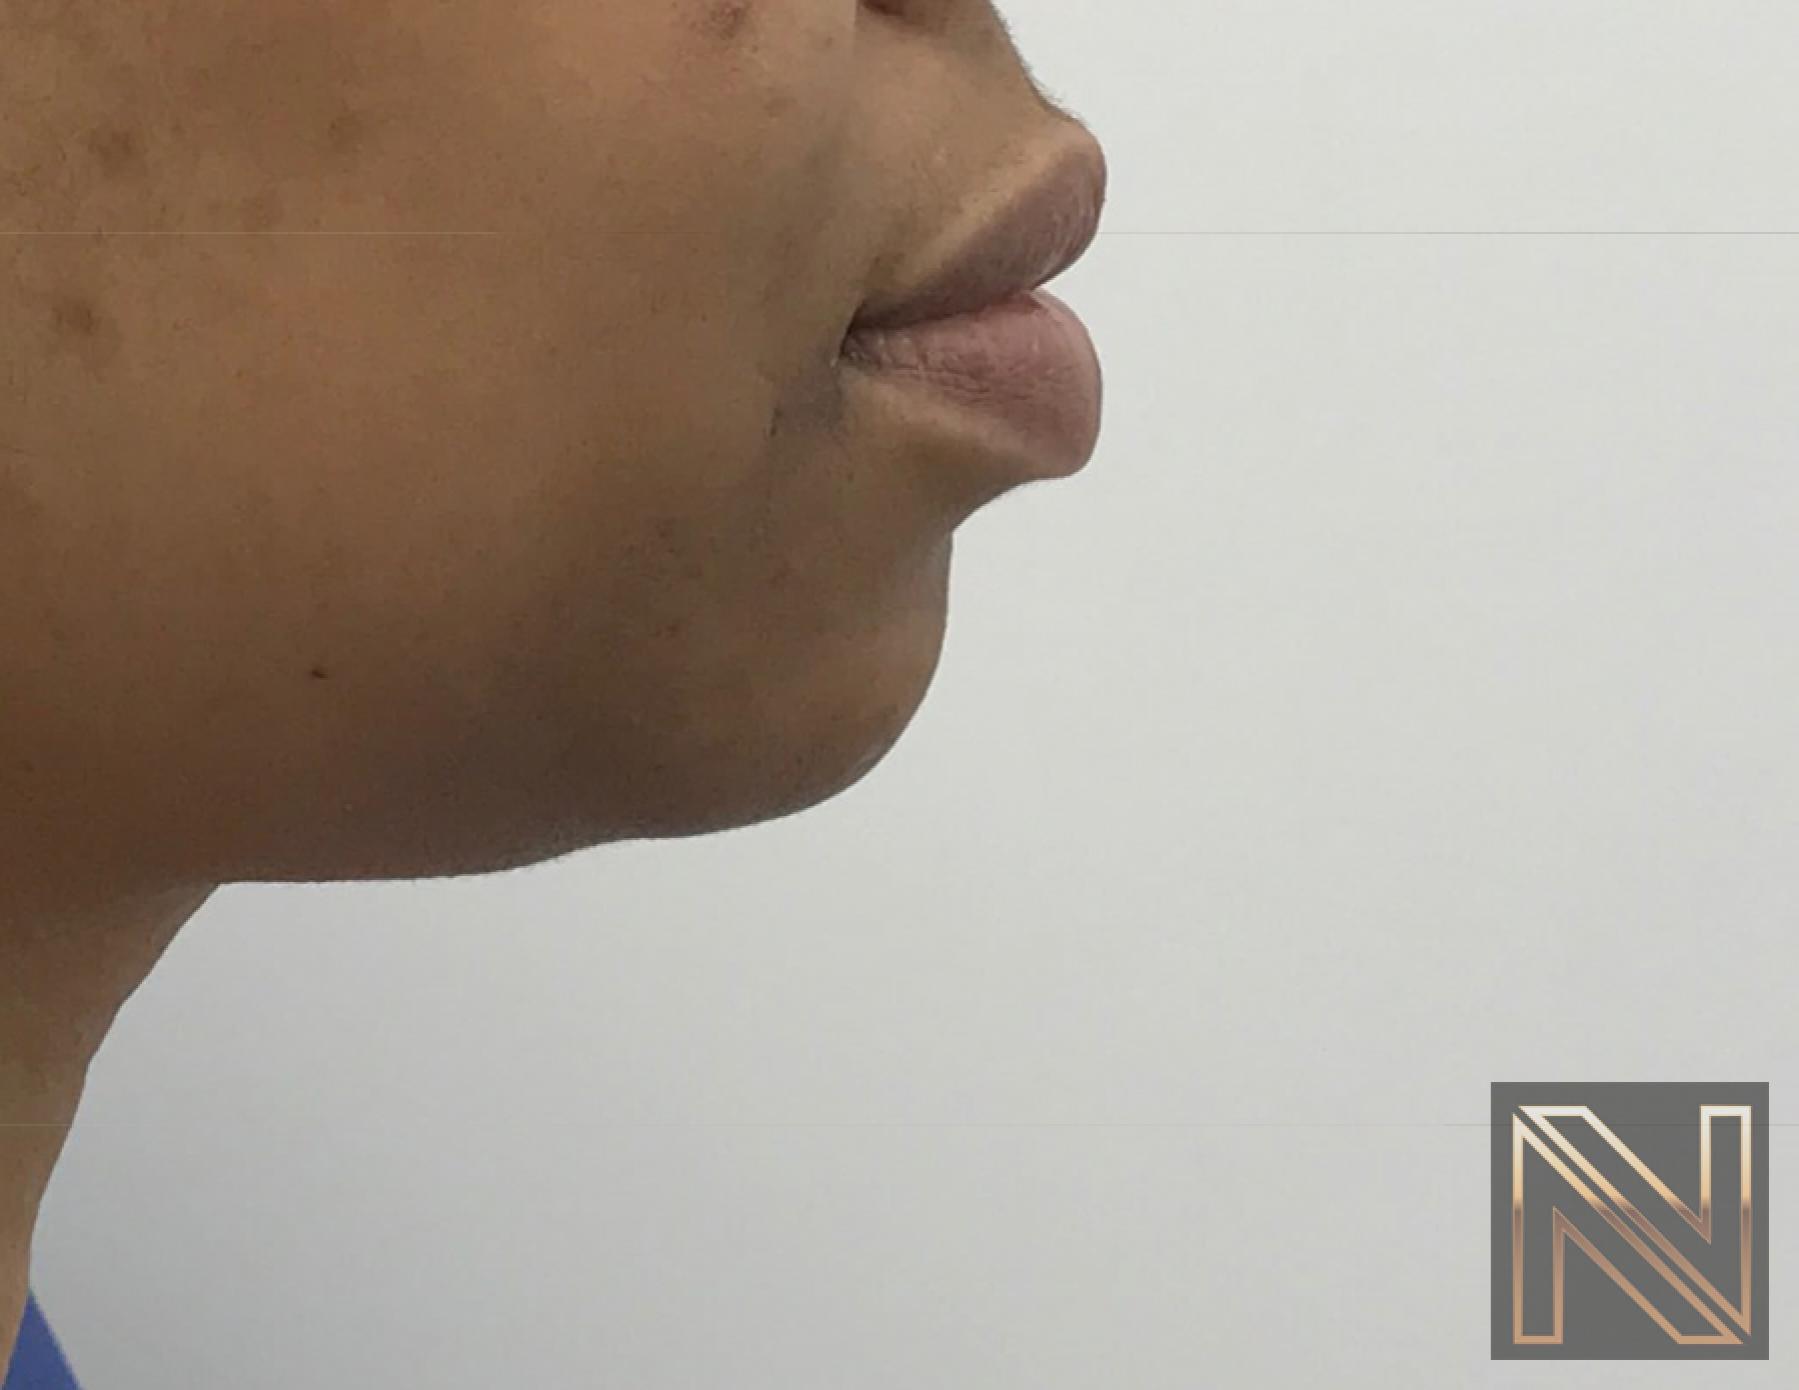 Chin Augmentation: Patient 3 - Before 4